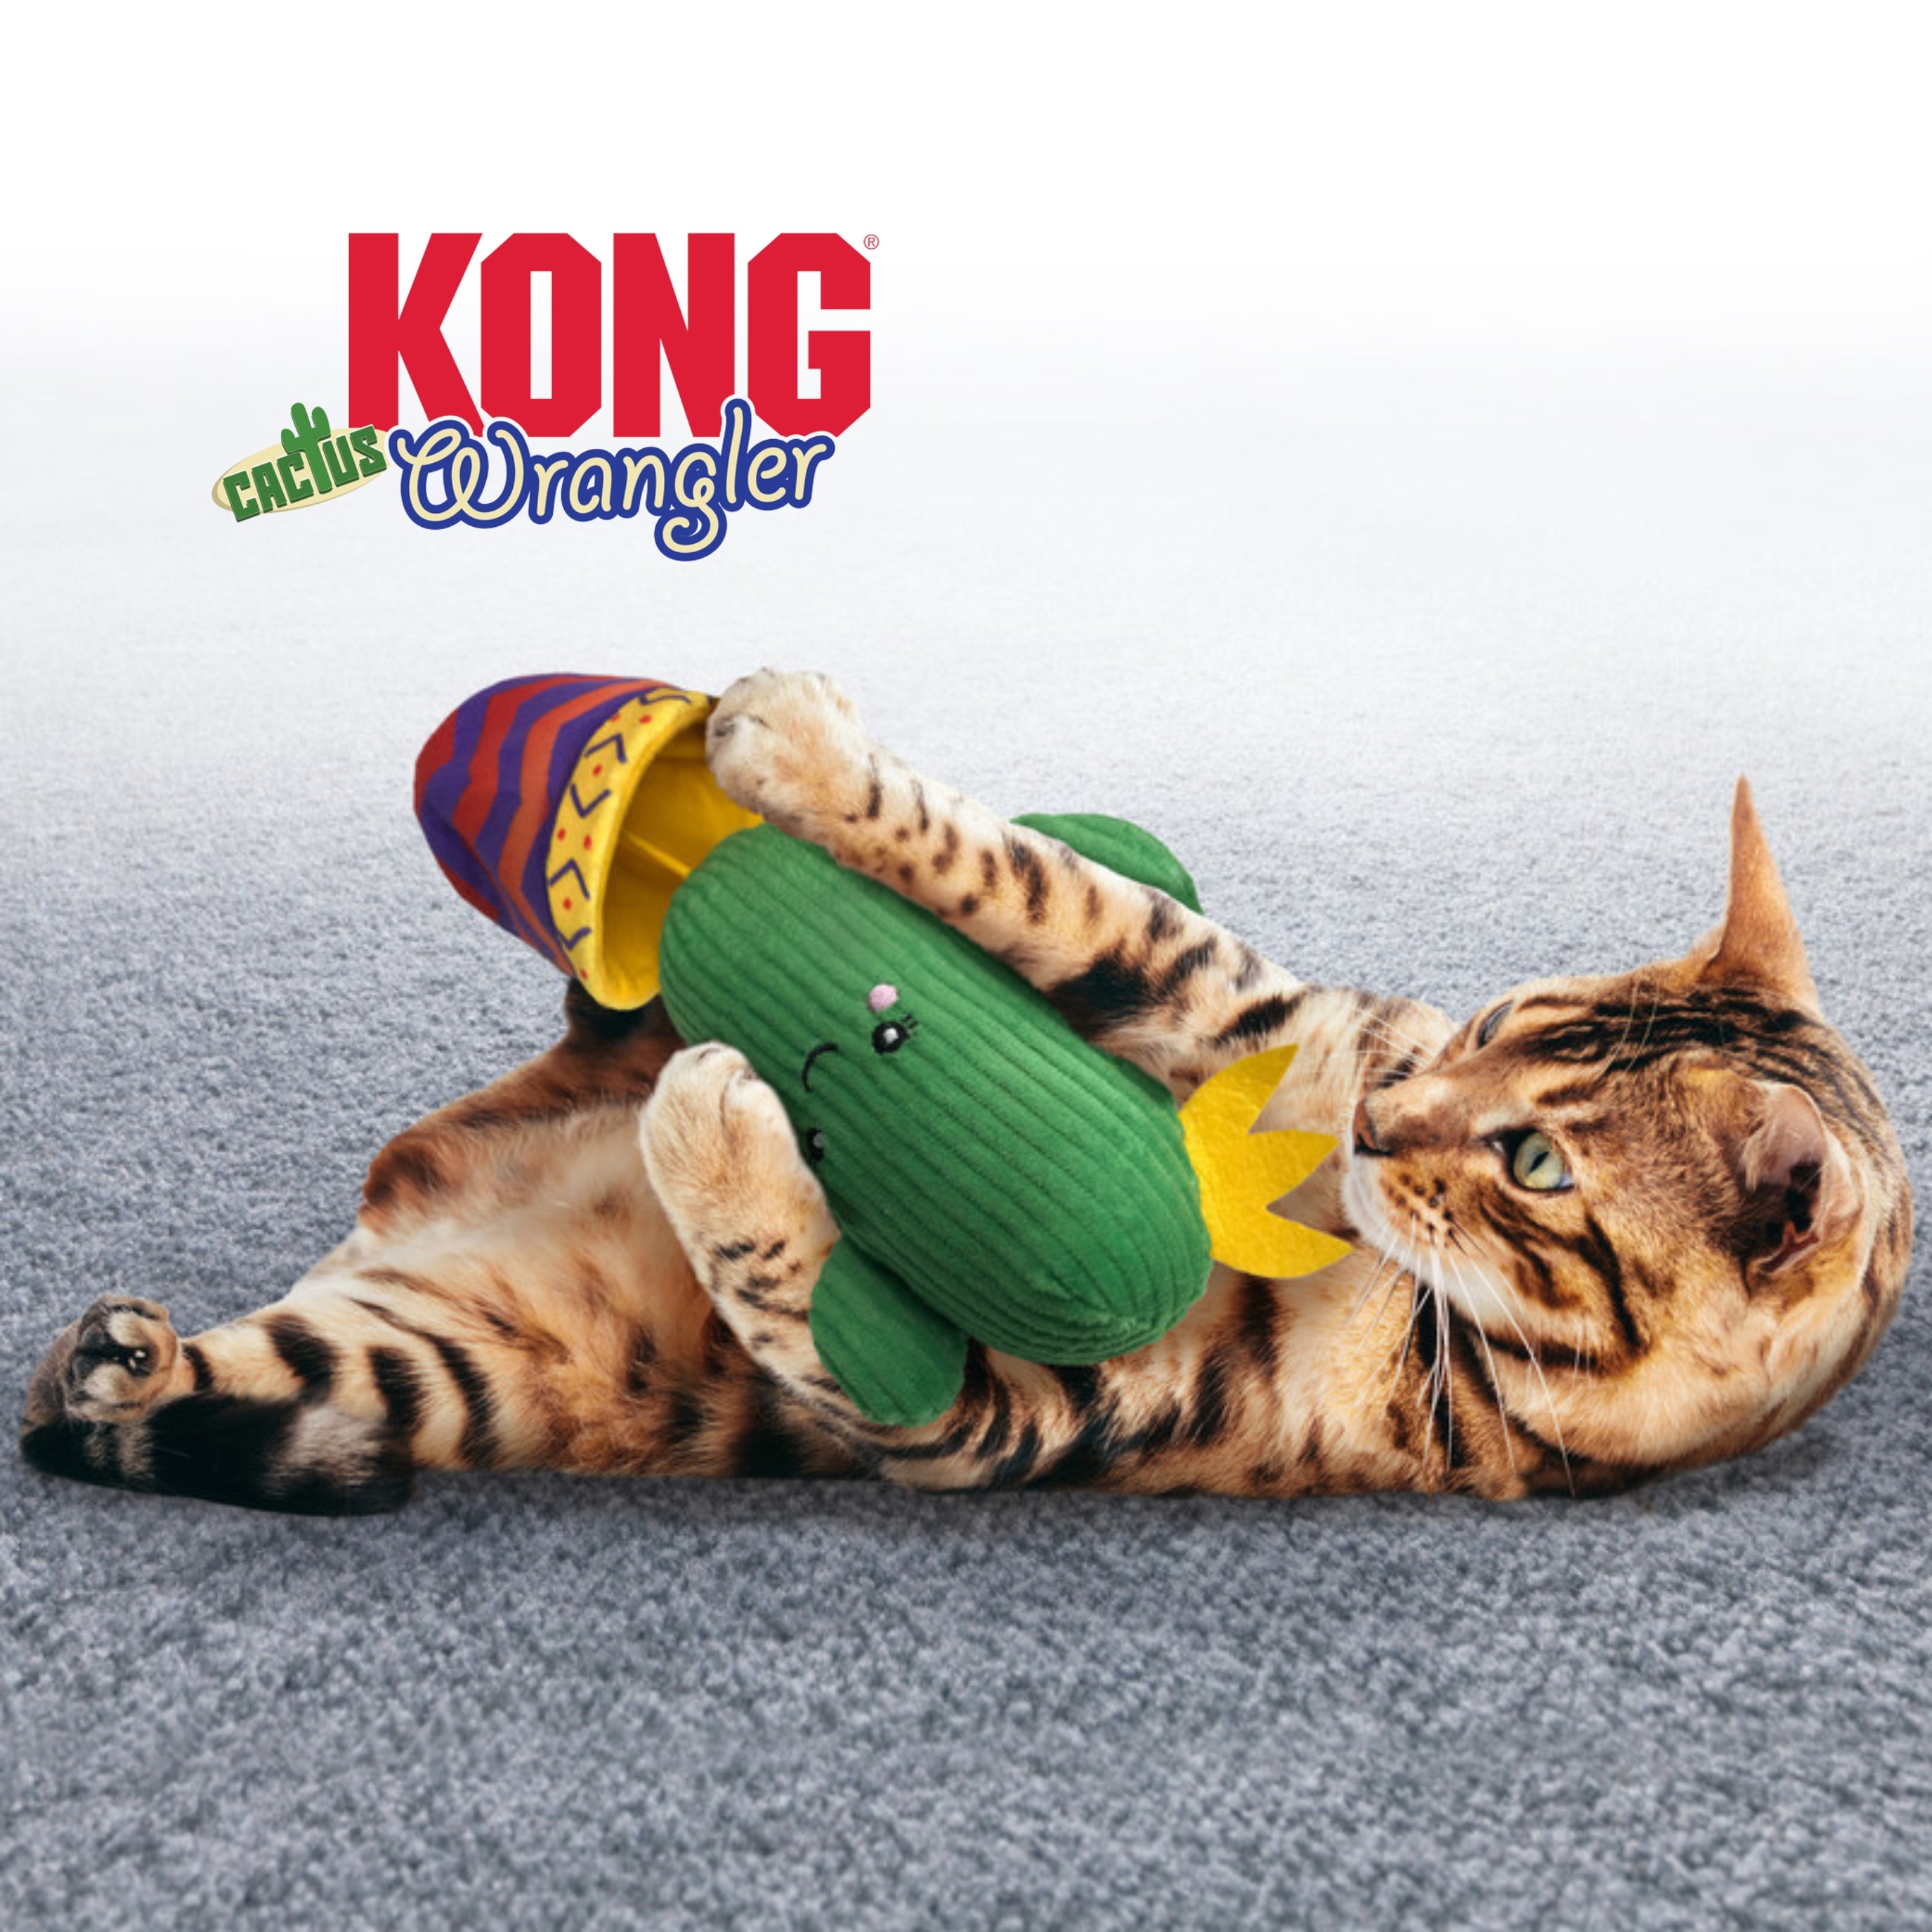 KONG Kitty-friendly interactive toy